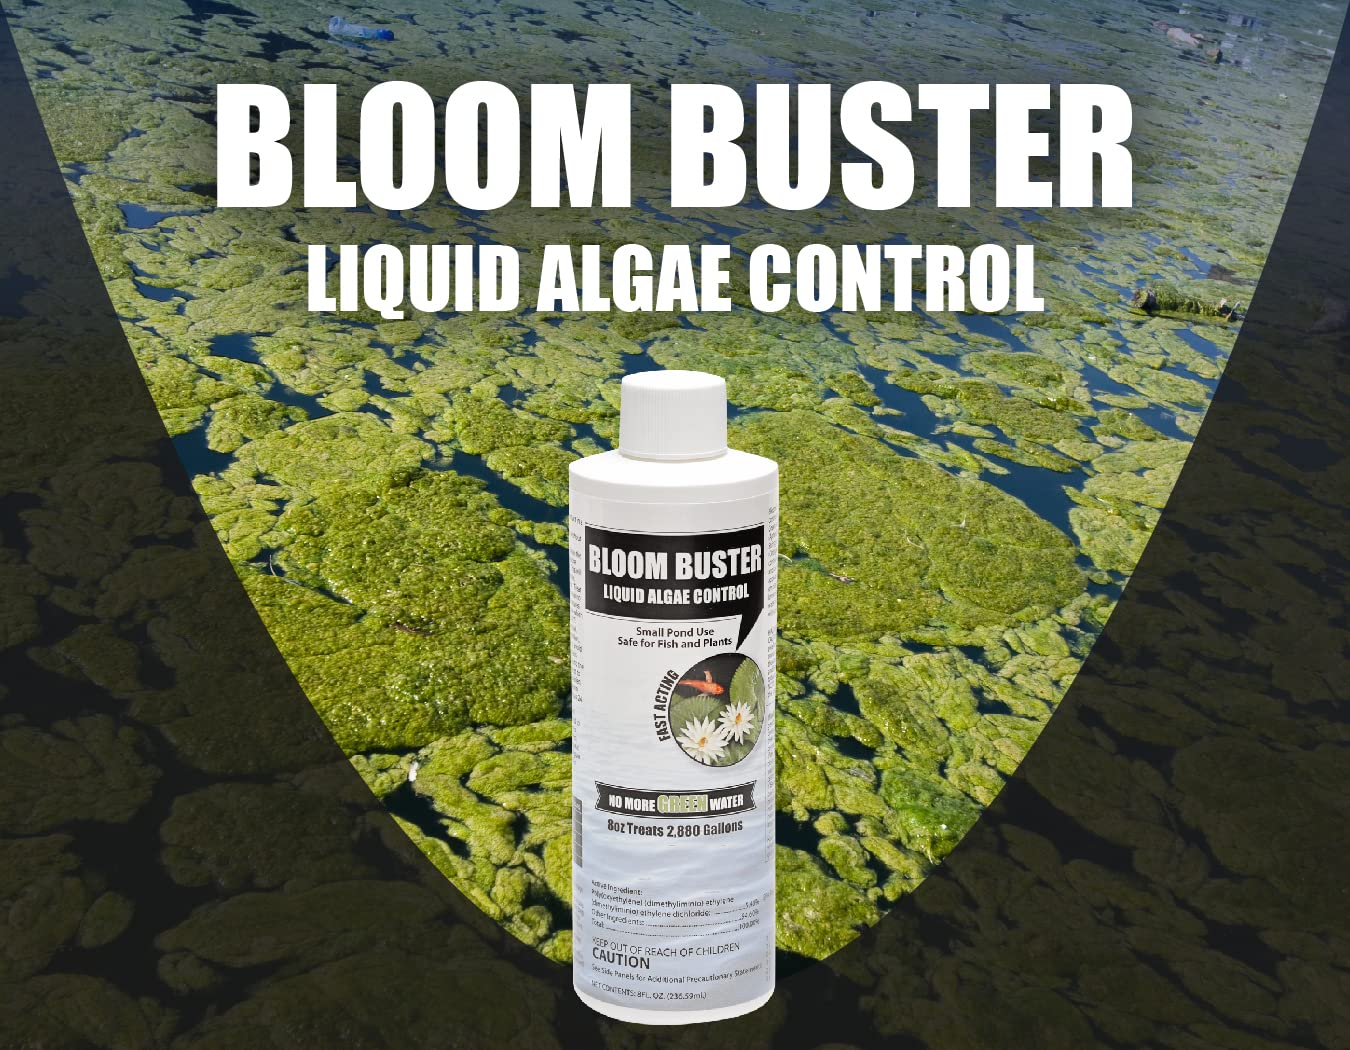 Bloom Buster Algae Control for Fish Ponds & Water Gardens - 8 Ounces - Safe for Koi Fish, Goldfish & Plants - Controls Algae in Ponds & Water Features, EPA Registered